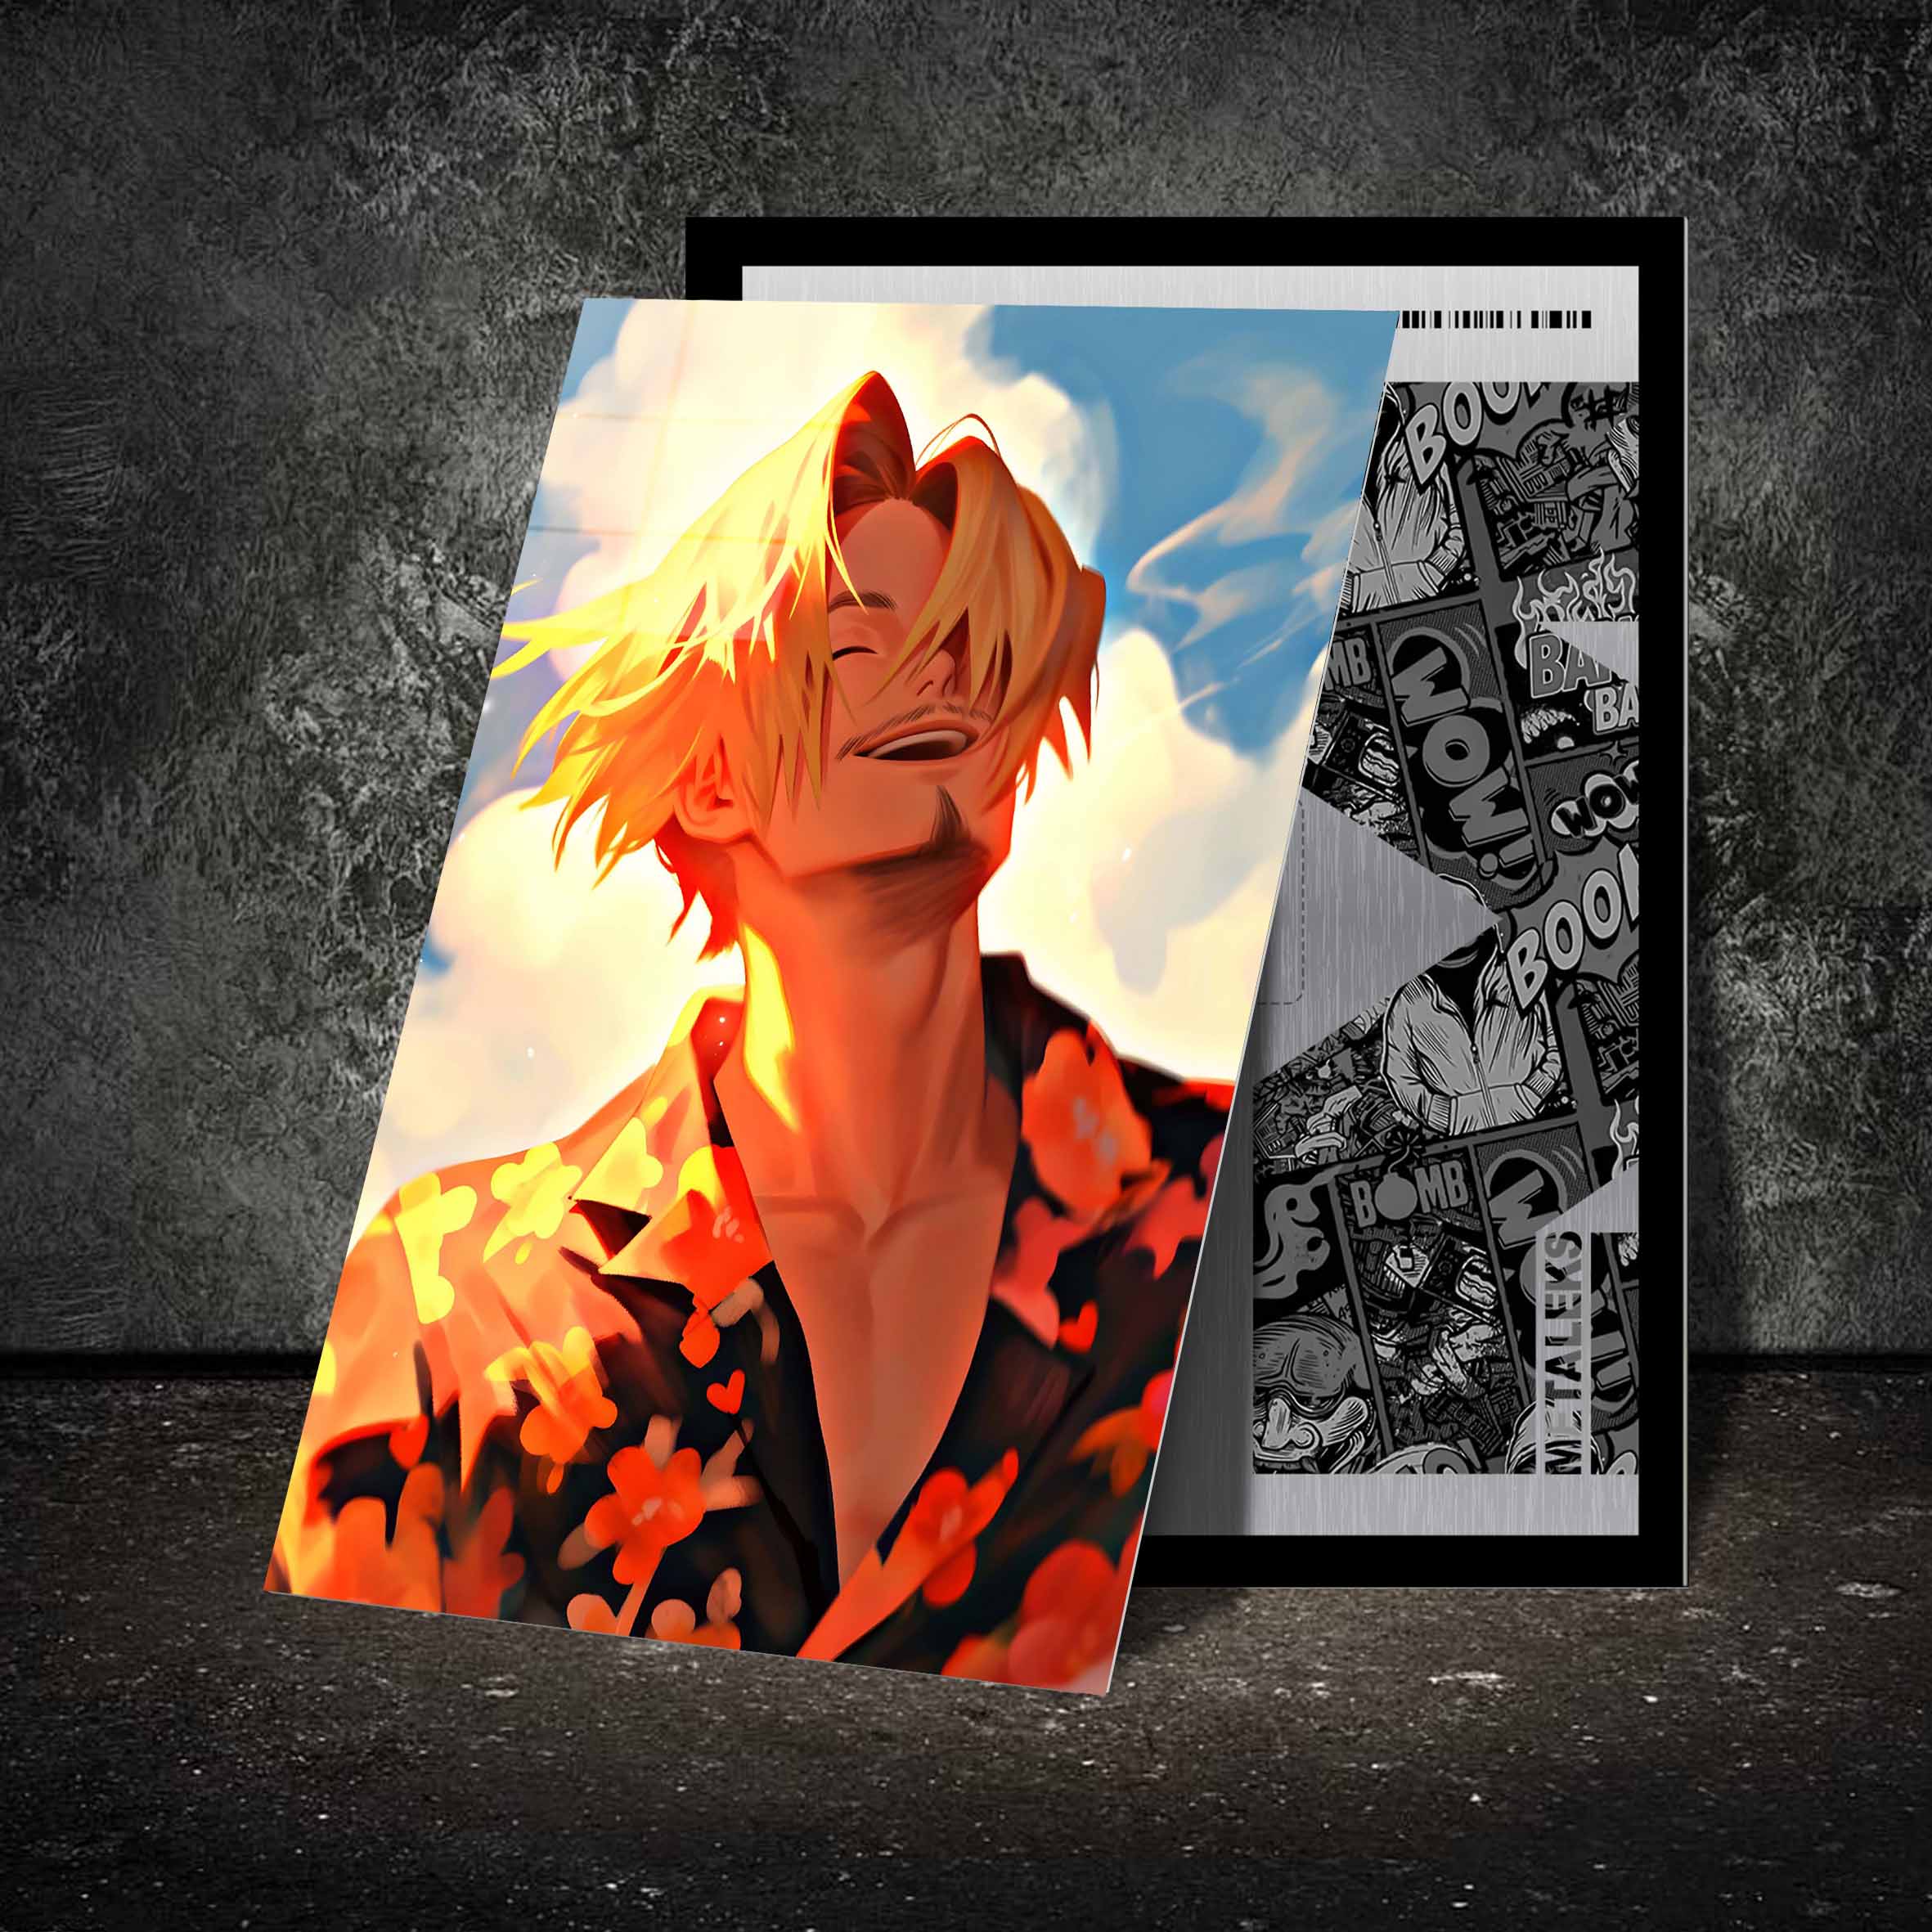 Sanji from one piece anime-designed by @Vid_M@tion